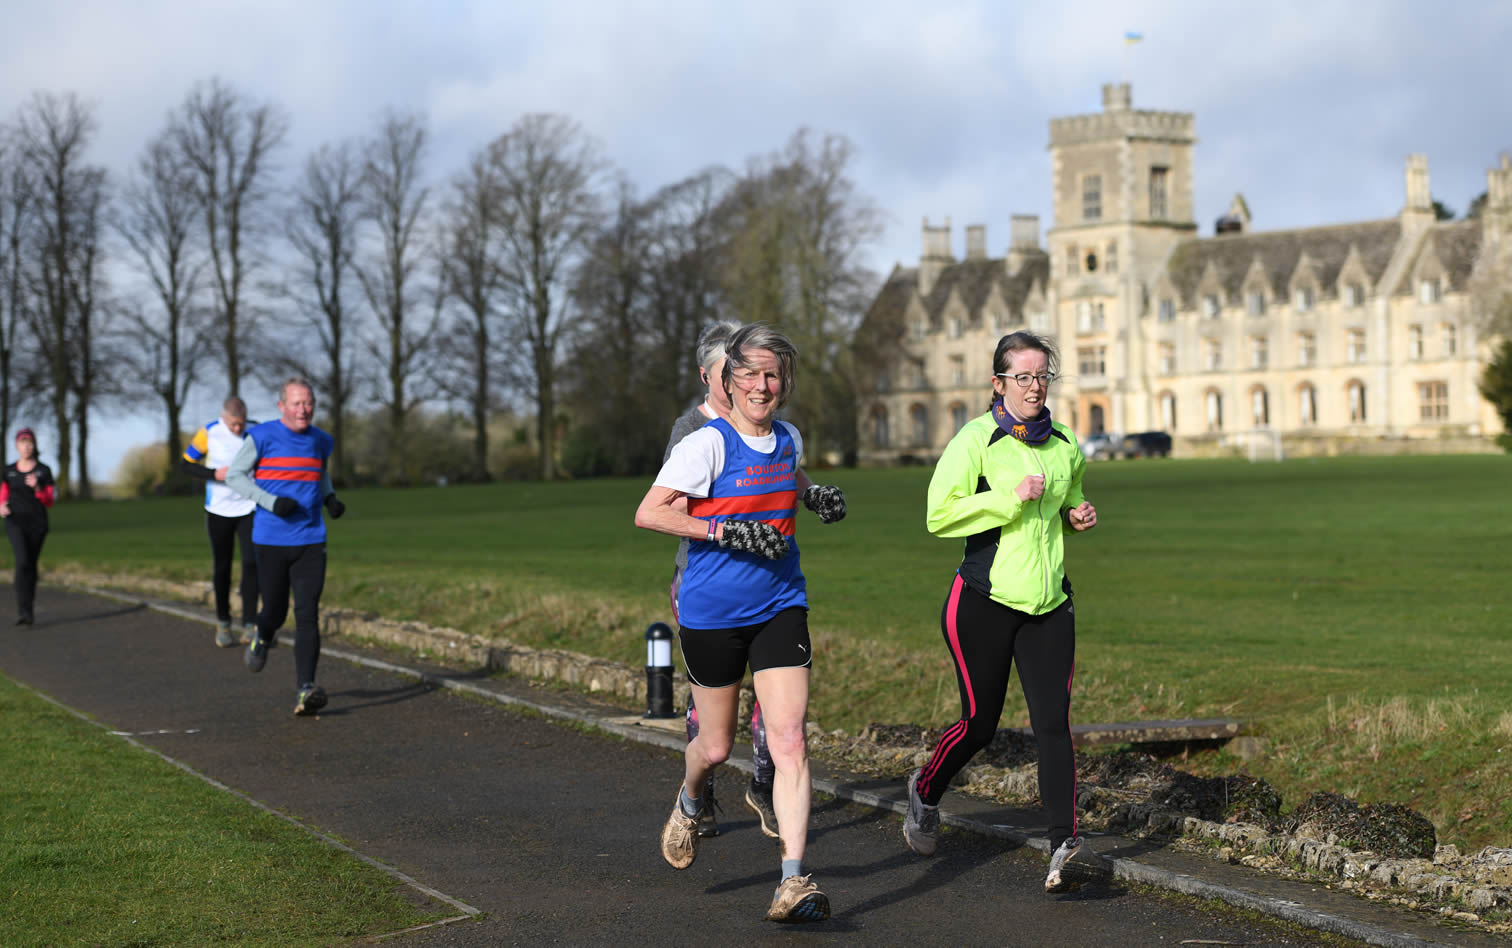 Liz Hulcup & Tom Knight at Cirencester parkrun - 12th March 2022